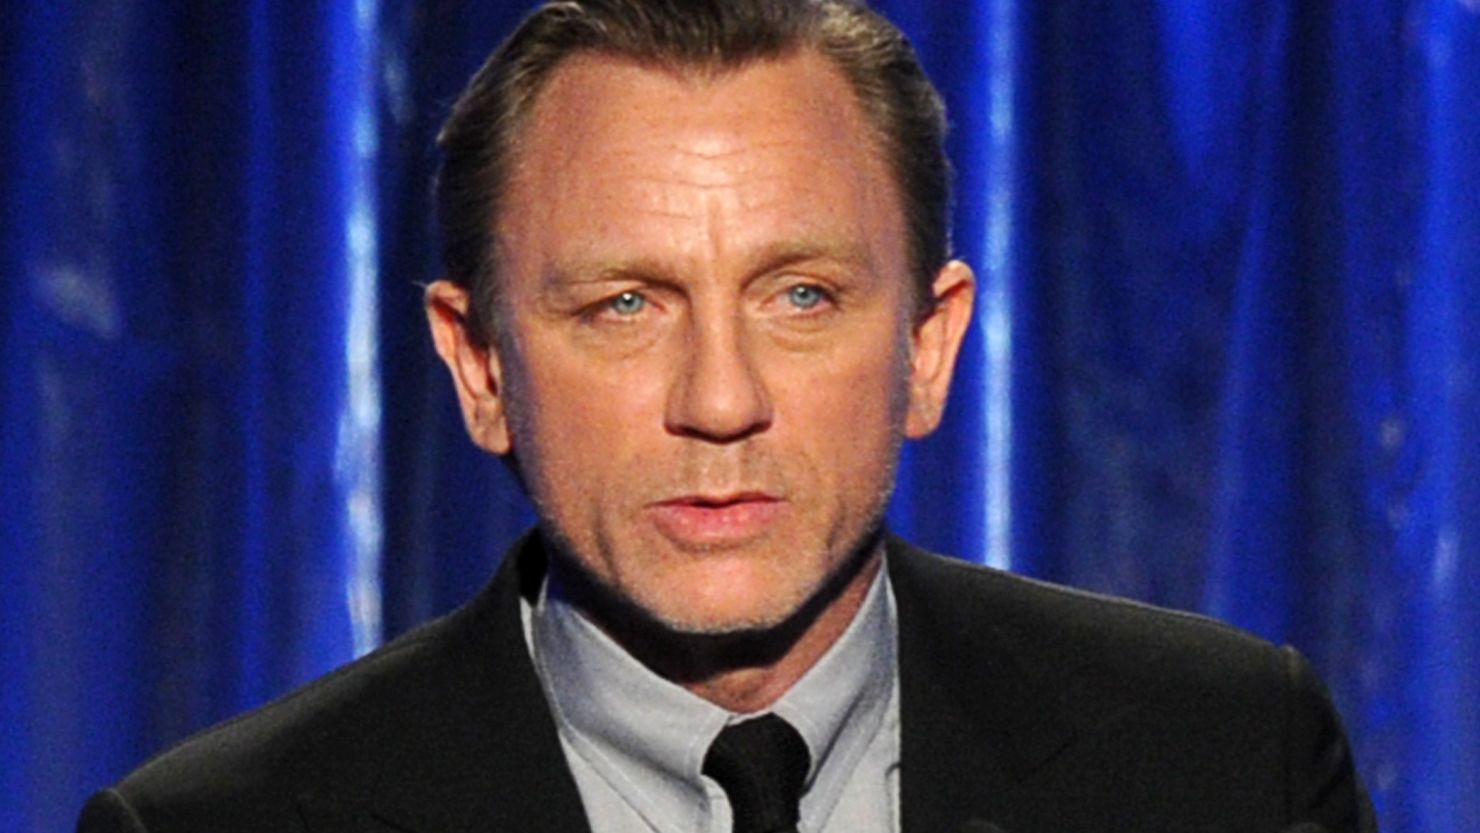 Actor Daniel Craig at the 25th annual Producers Guild of America Awards on January 19, 2014 in Beverly Hills, California.